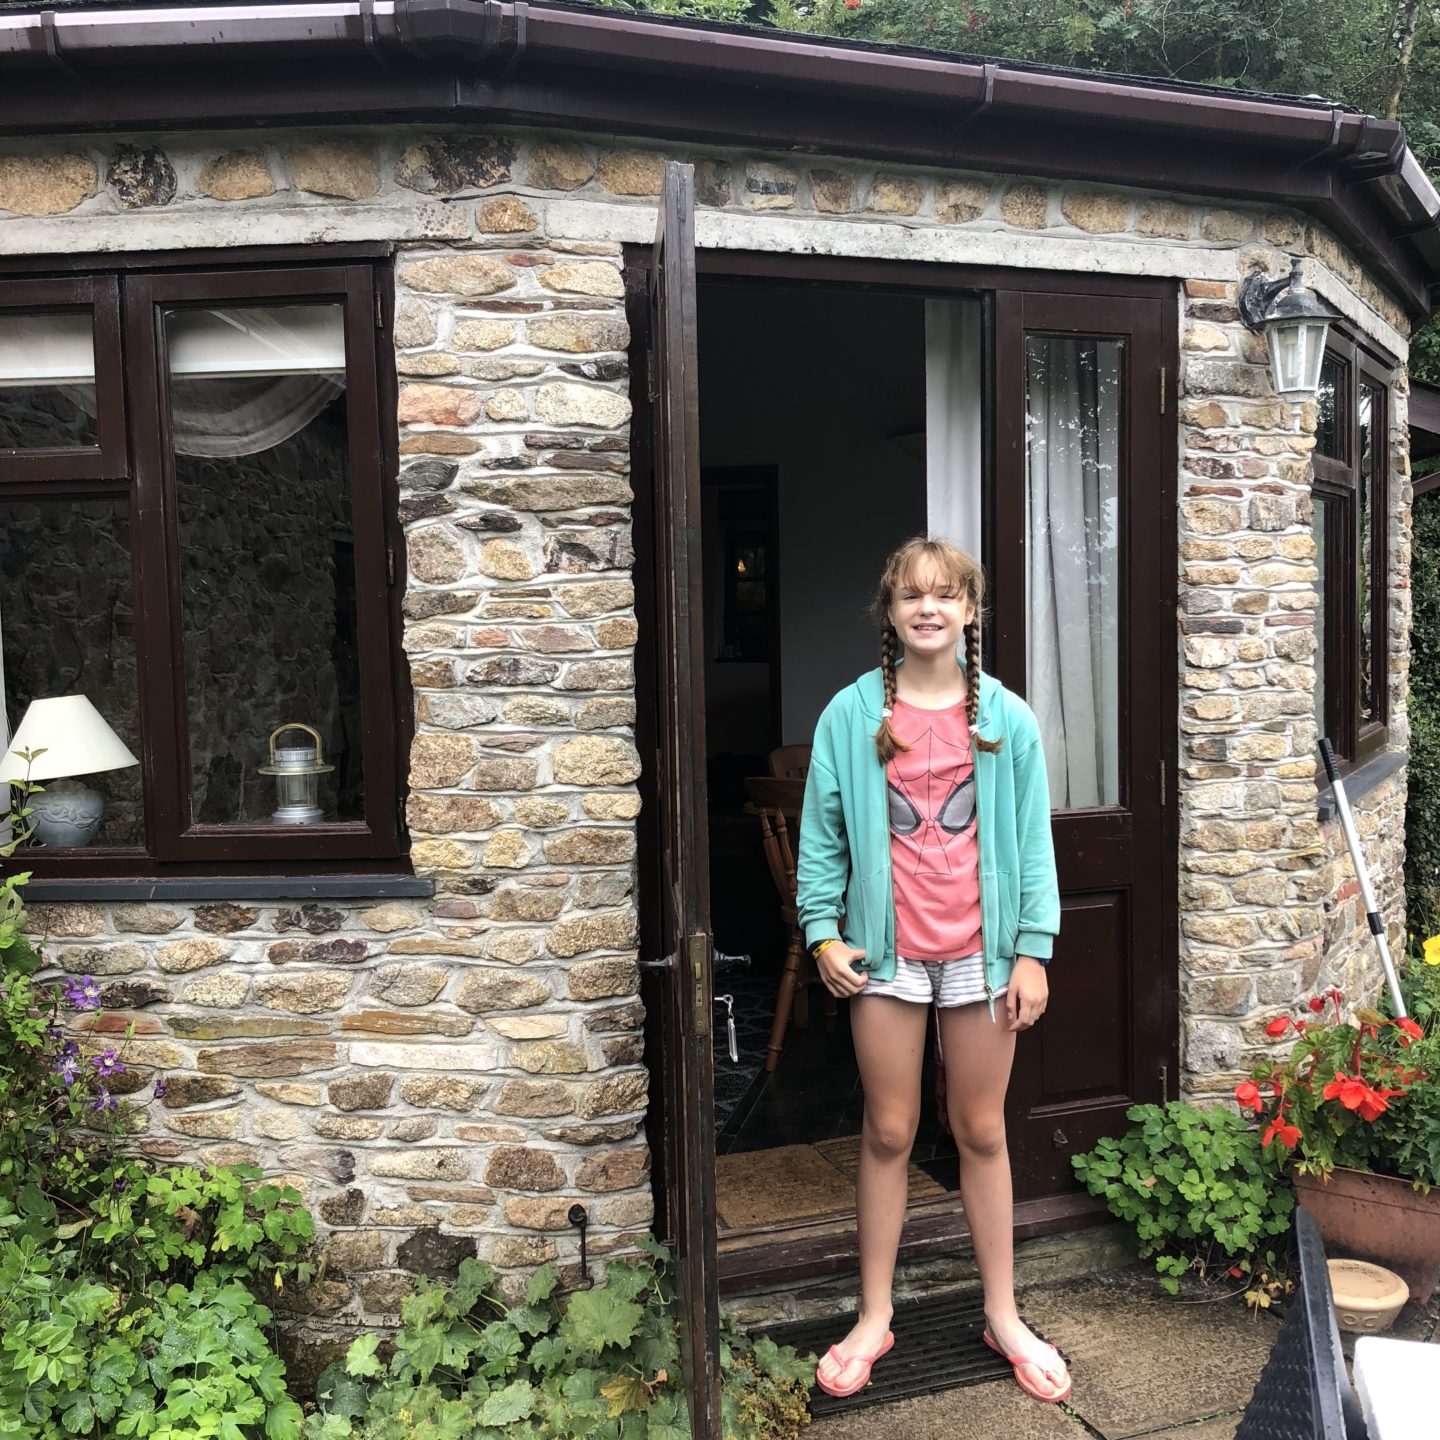 Holiday Cottage in Cornwall and Toad hall Cottages Review